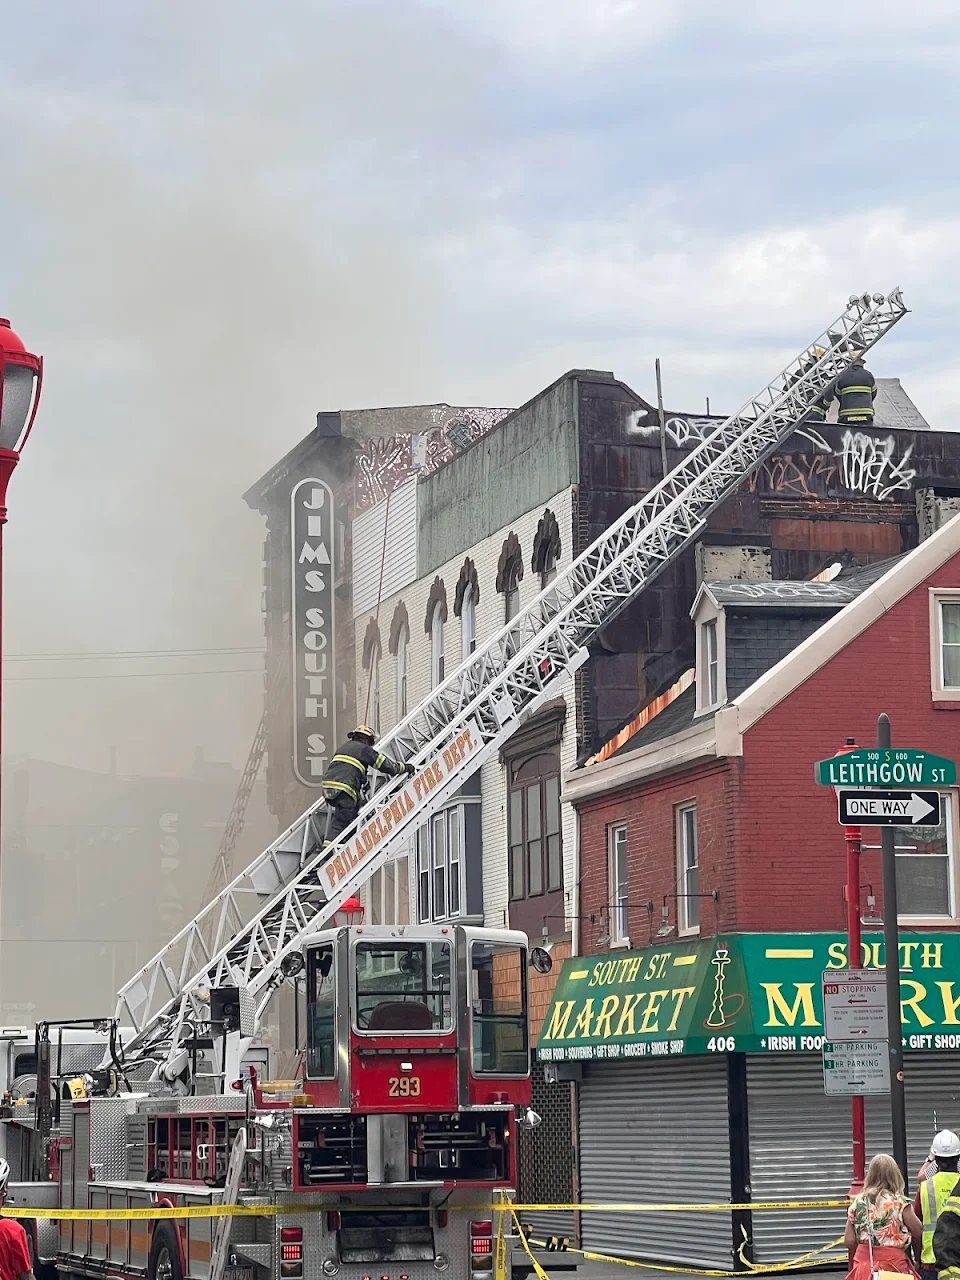 Iconic Jim’s steak burns down in Philly, everyone got out safely.